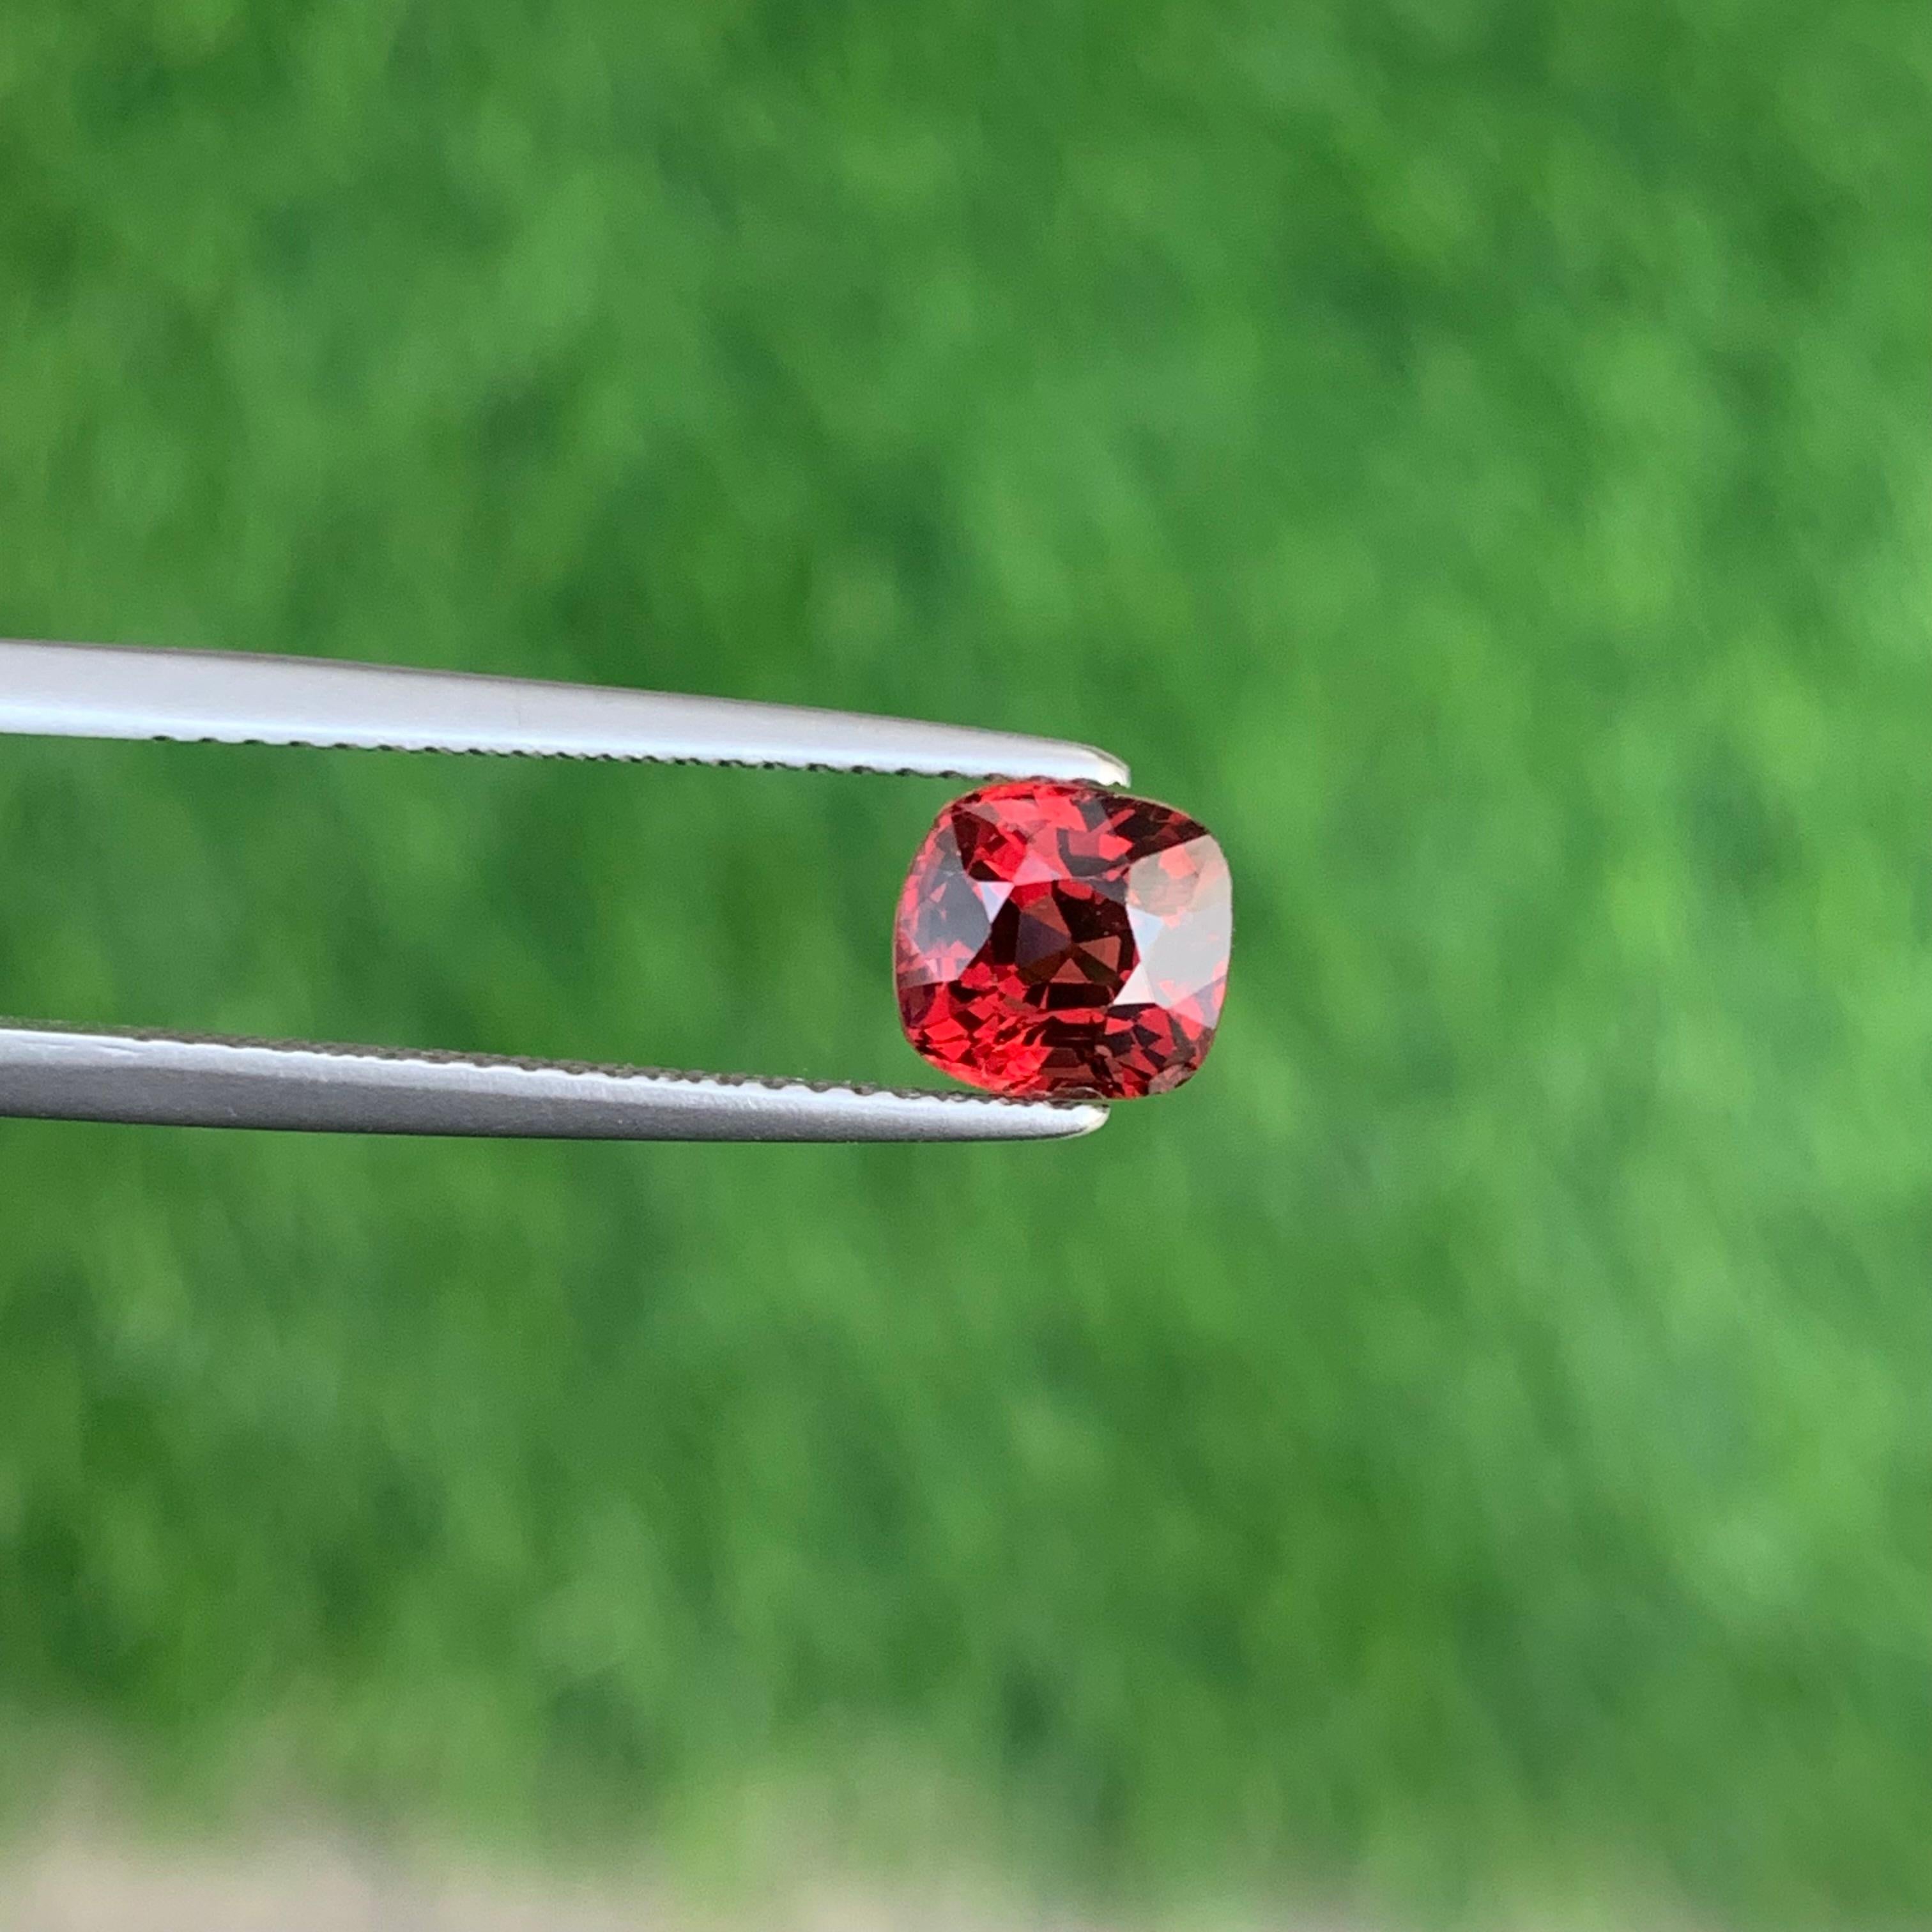 GGI Certified 1.05 Carat Faceted Red Spinel From Myanmar, Loose Burmese Spinel For Sale 4